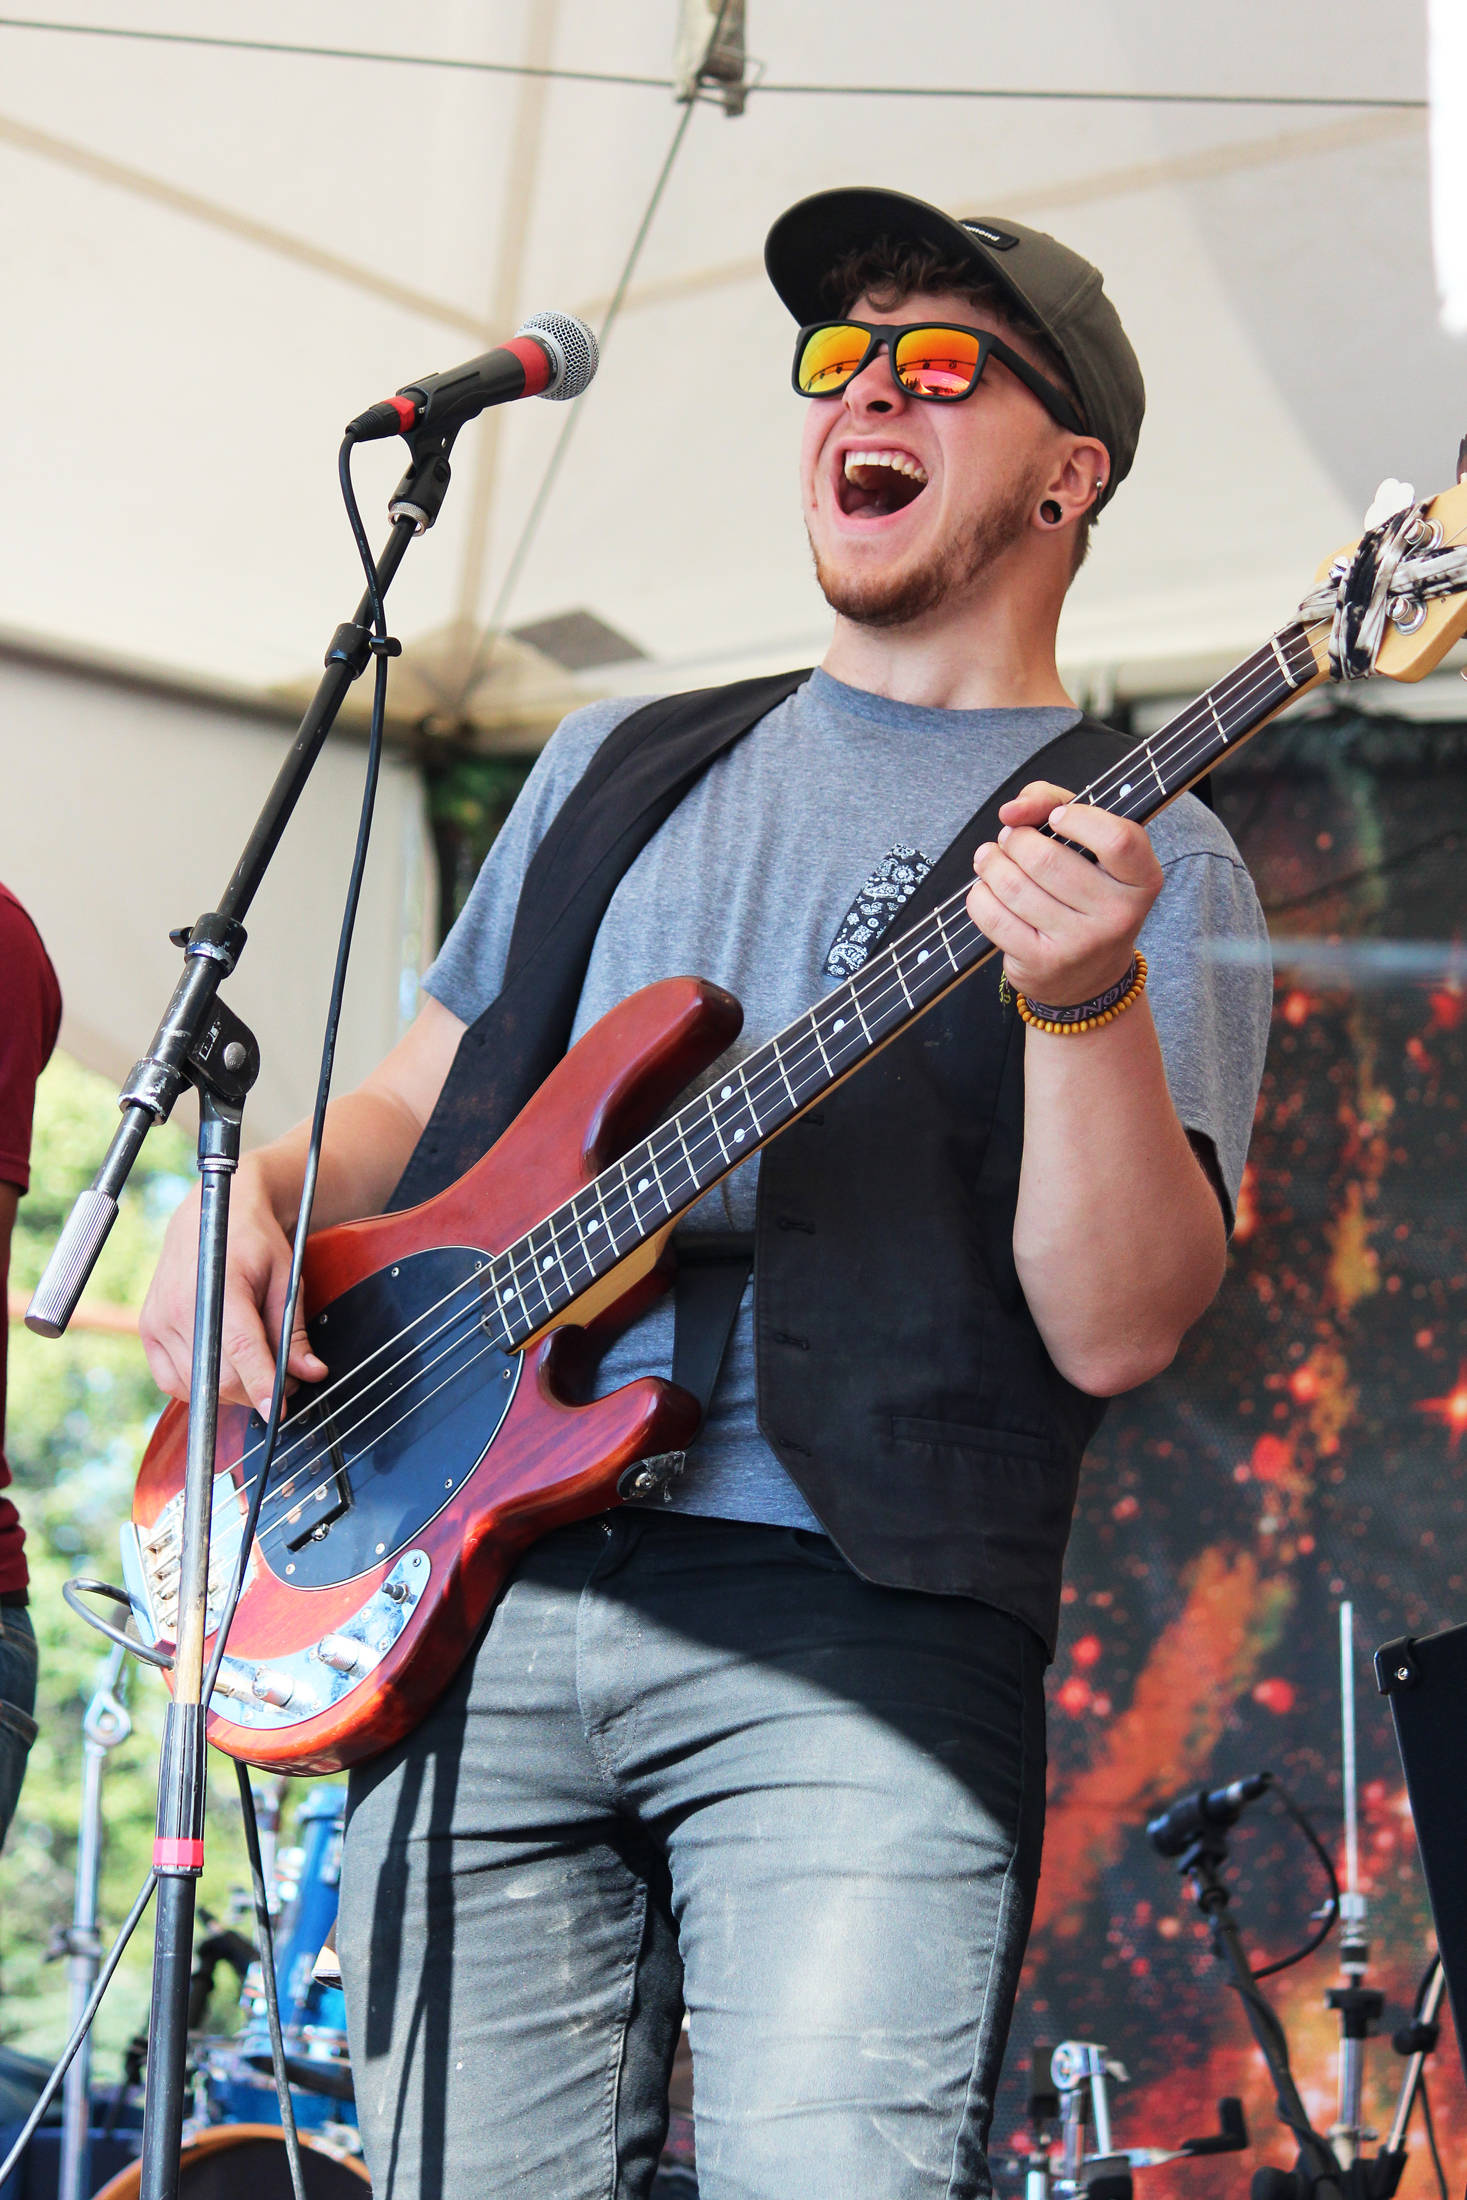 Ben Sayers, bass player for Blackwater Railroad Company, performs with the band on the River Stage on Friday, Aug. 2, 2019 at Salmonfest in Ninilchik, Alaska. (Photo by Megan Pacer/Homer News)